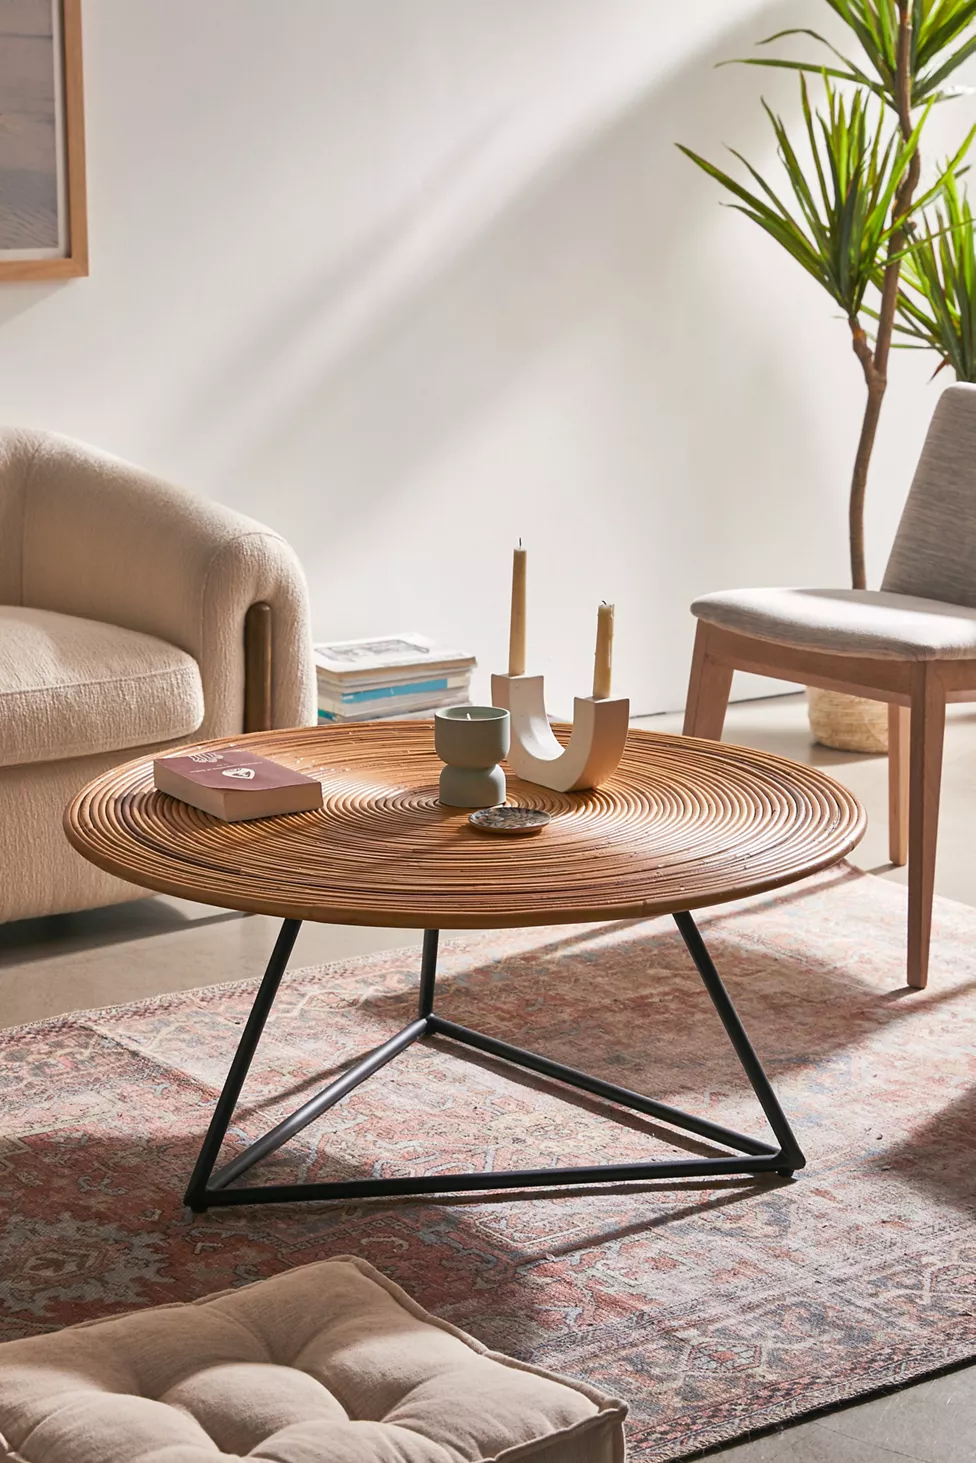 16 Boho Coffee Table Ideas for Your Living Room